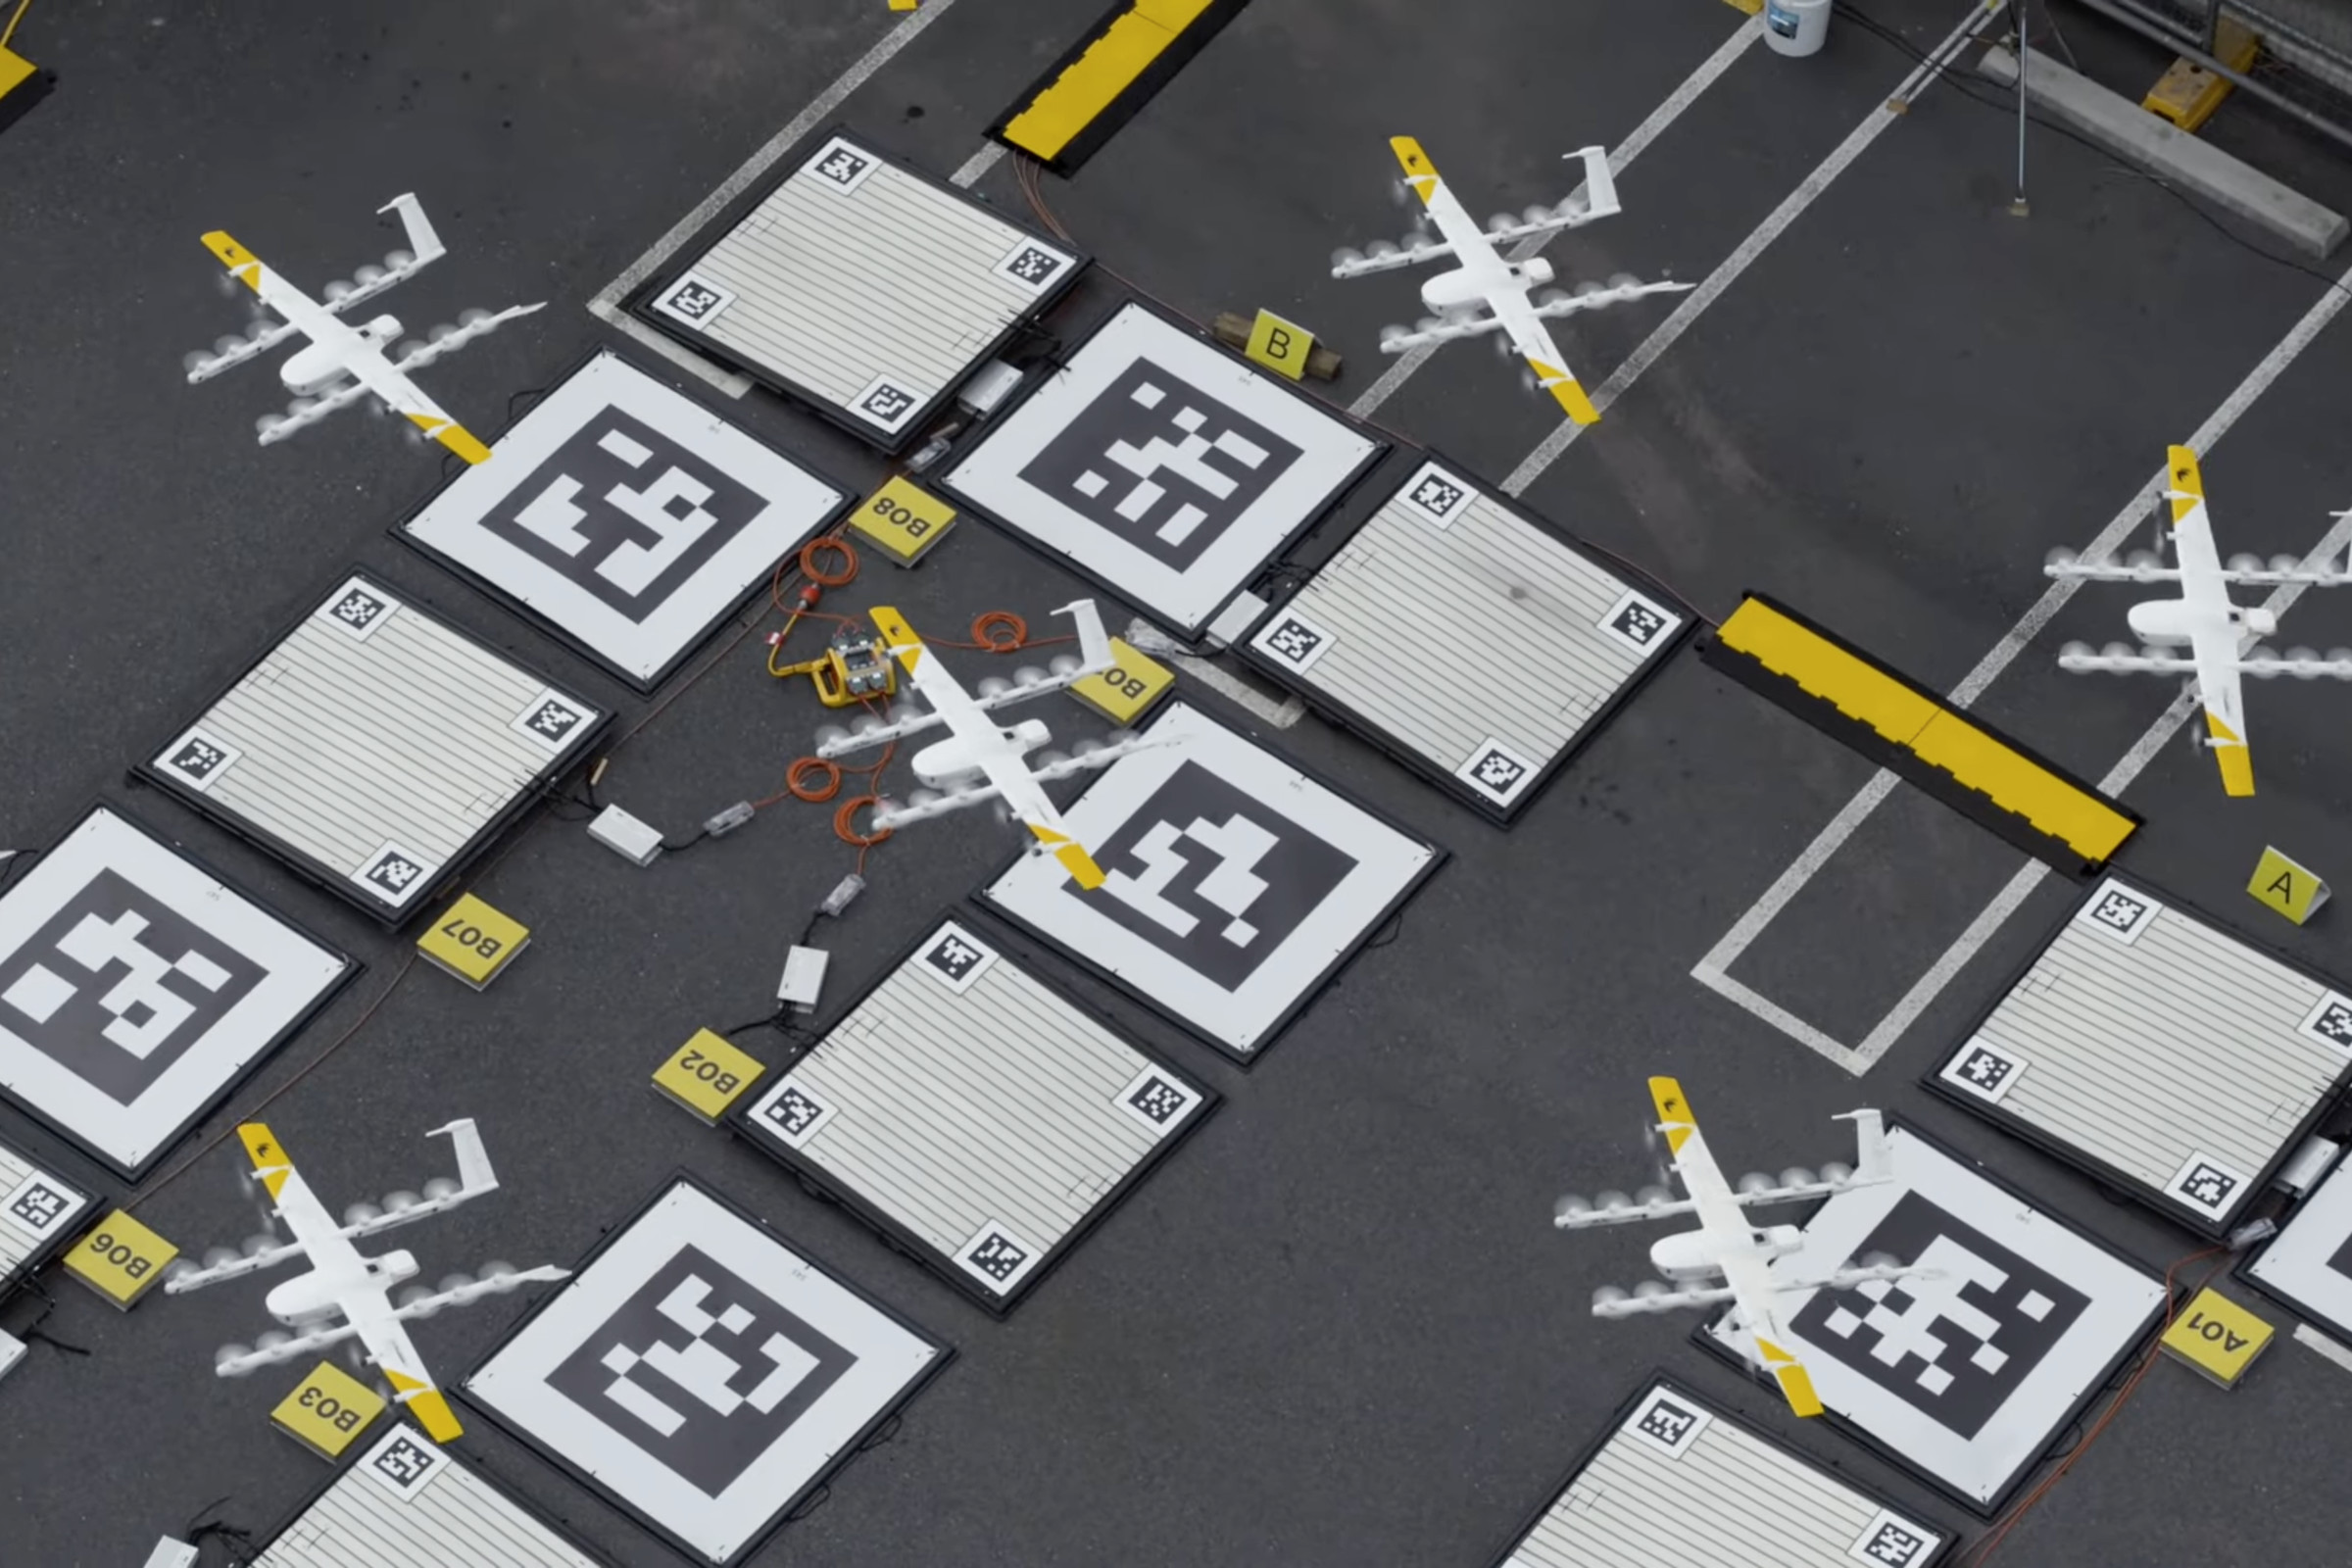 rooftop with squares, some with QR codes, others for drones to land to charge, 6 drones are lifting off from the pads.